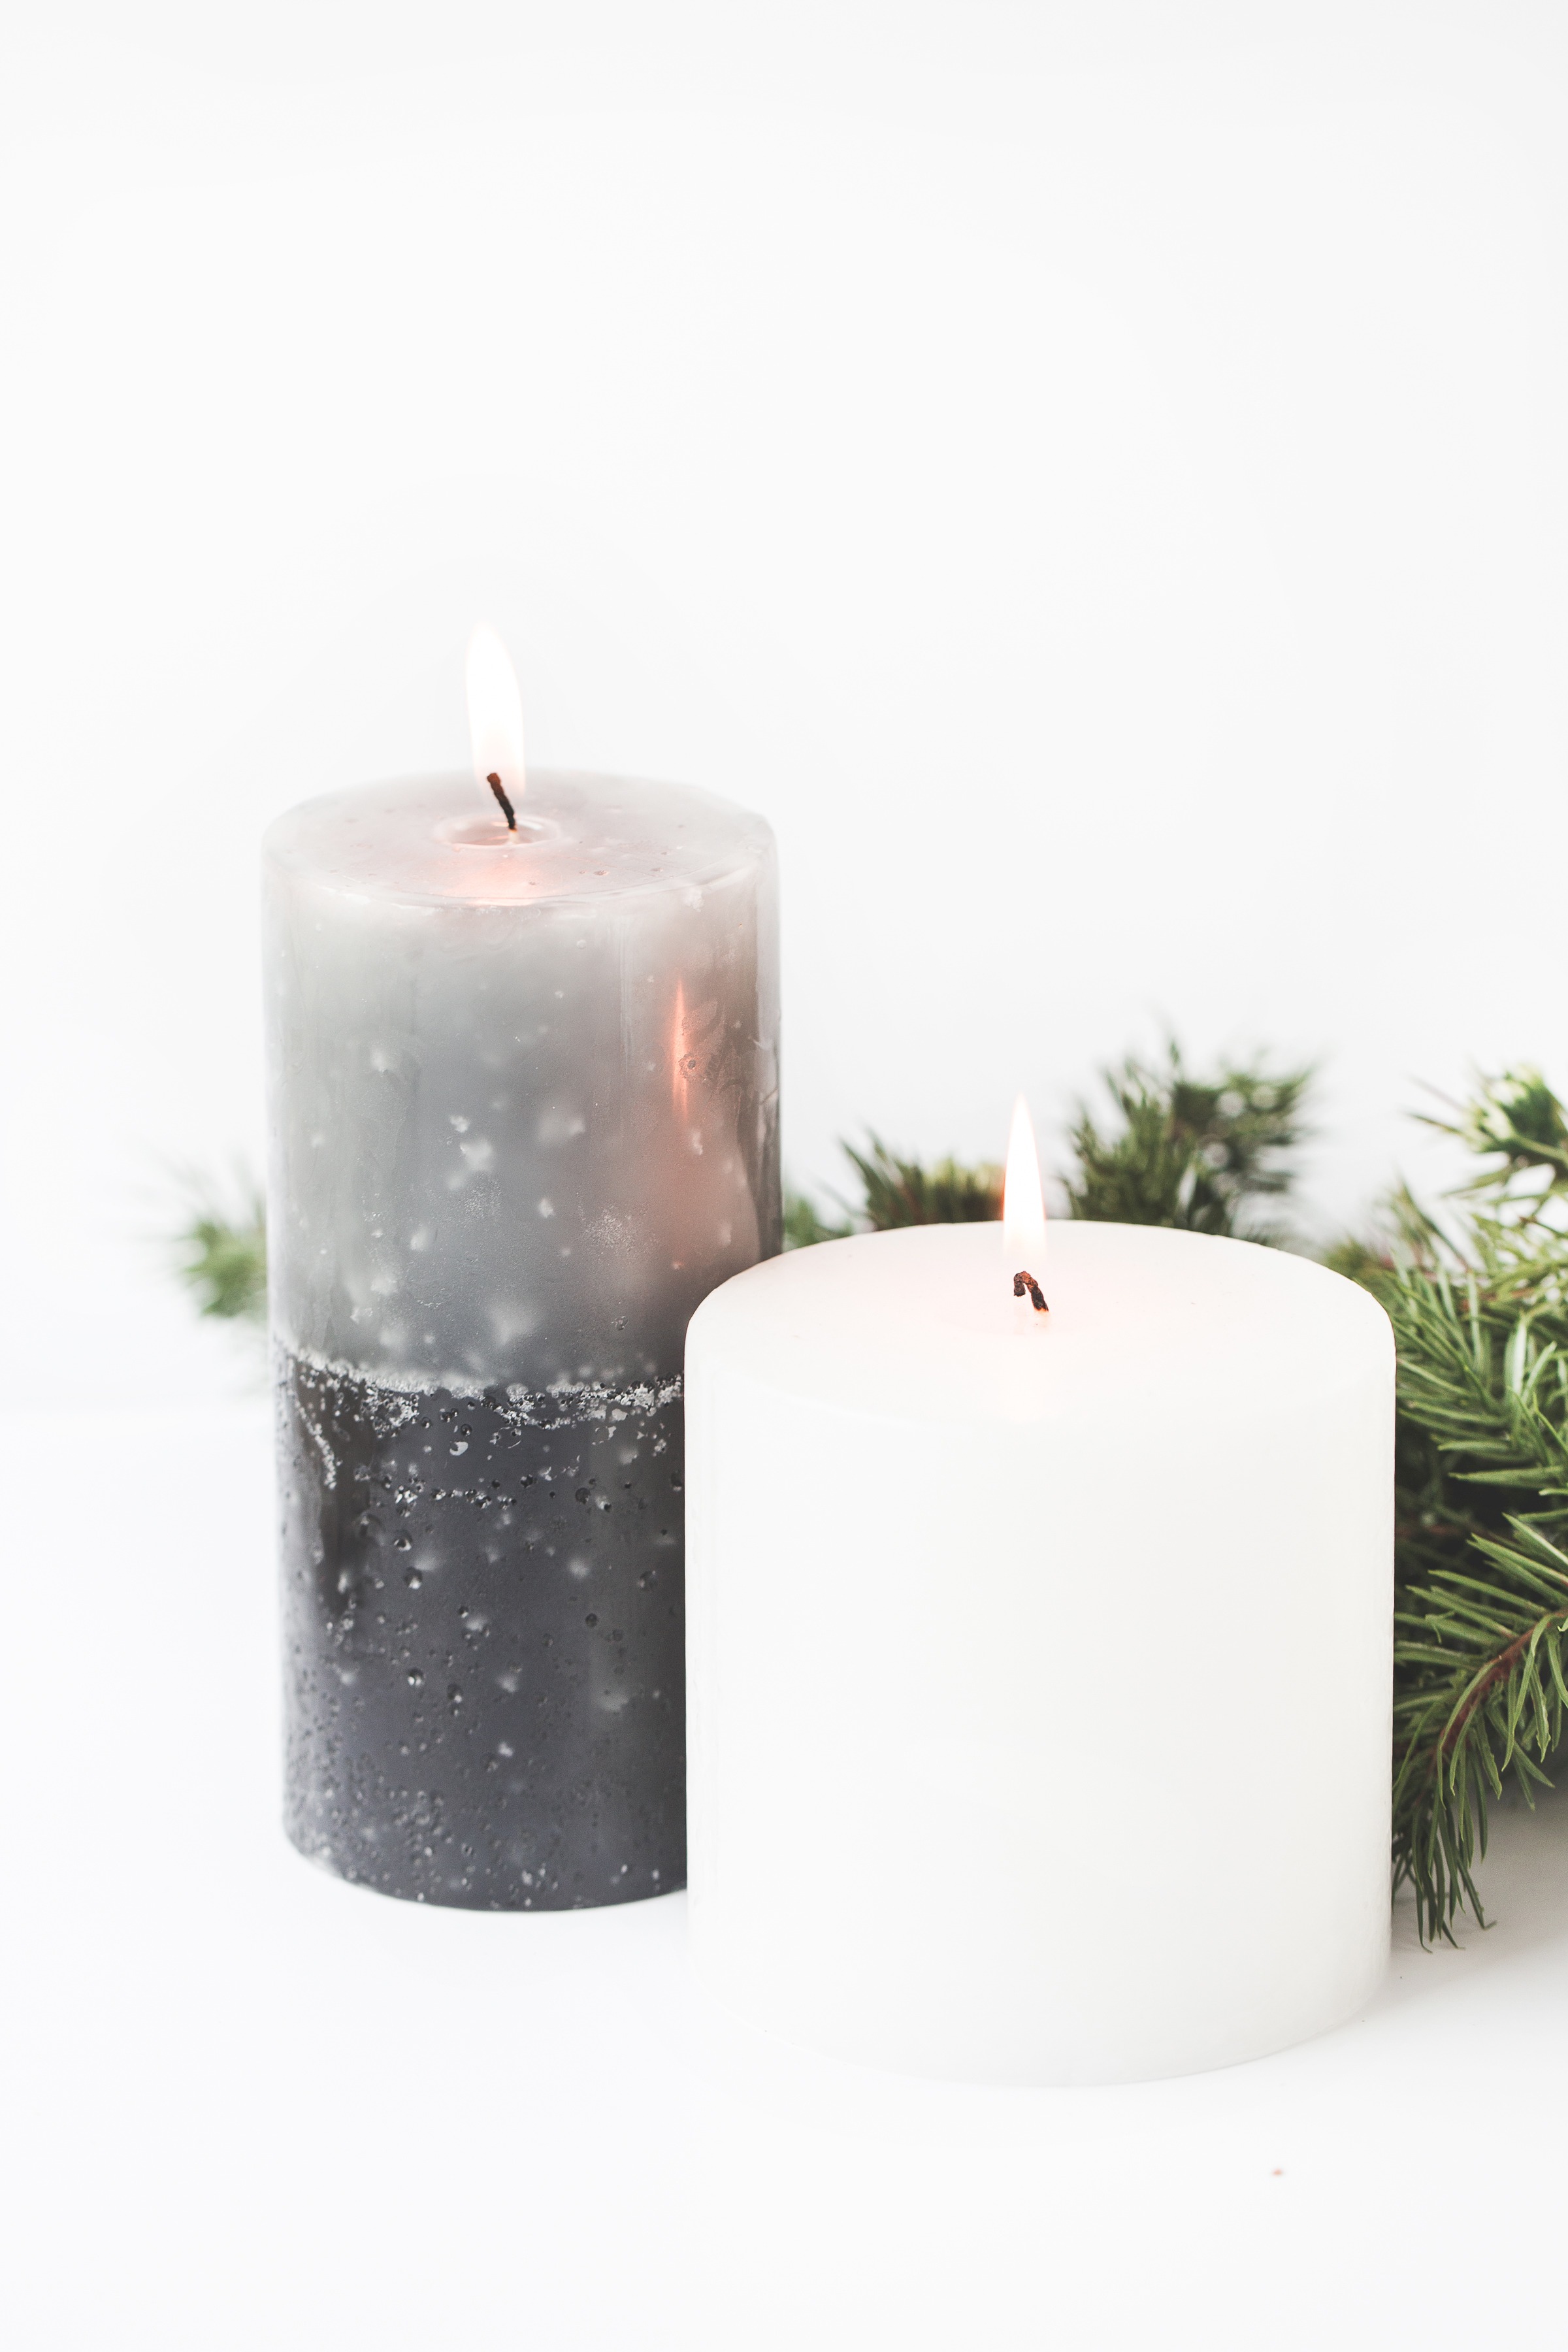 The Best Candles to Make Your House More Festive 39